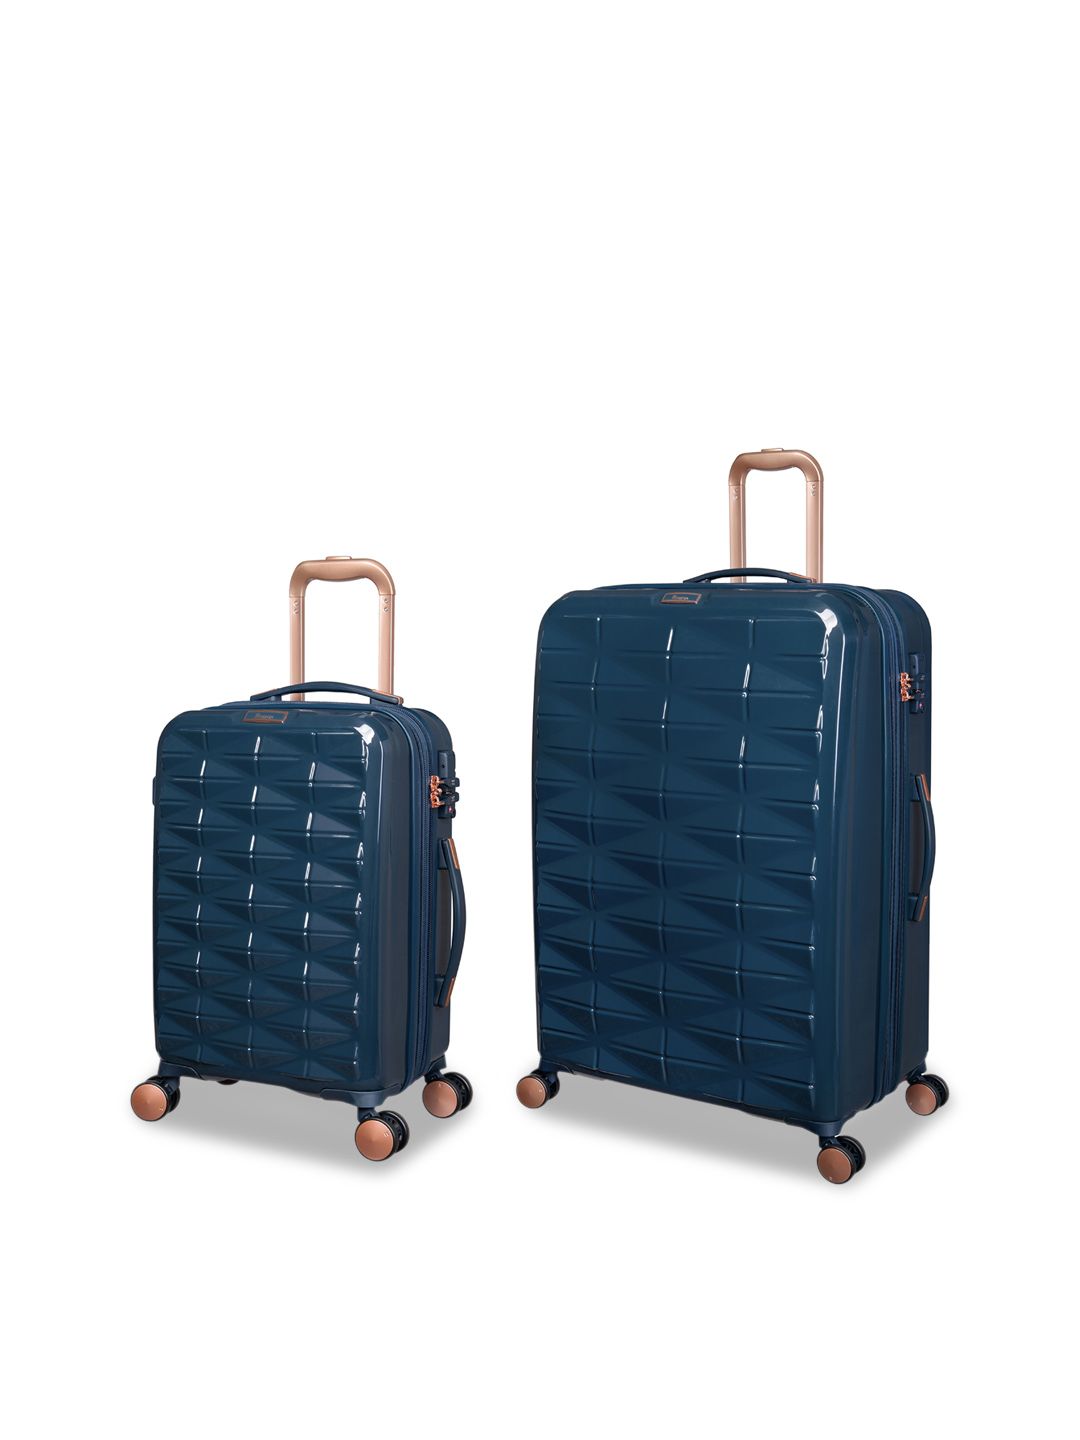 IT luggage Set Of 2 Blue Textured Hard-Sided Trolley Bag Price in India